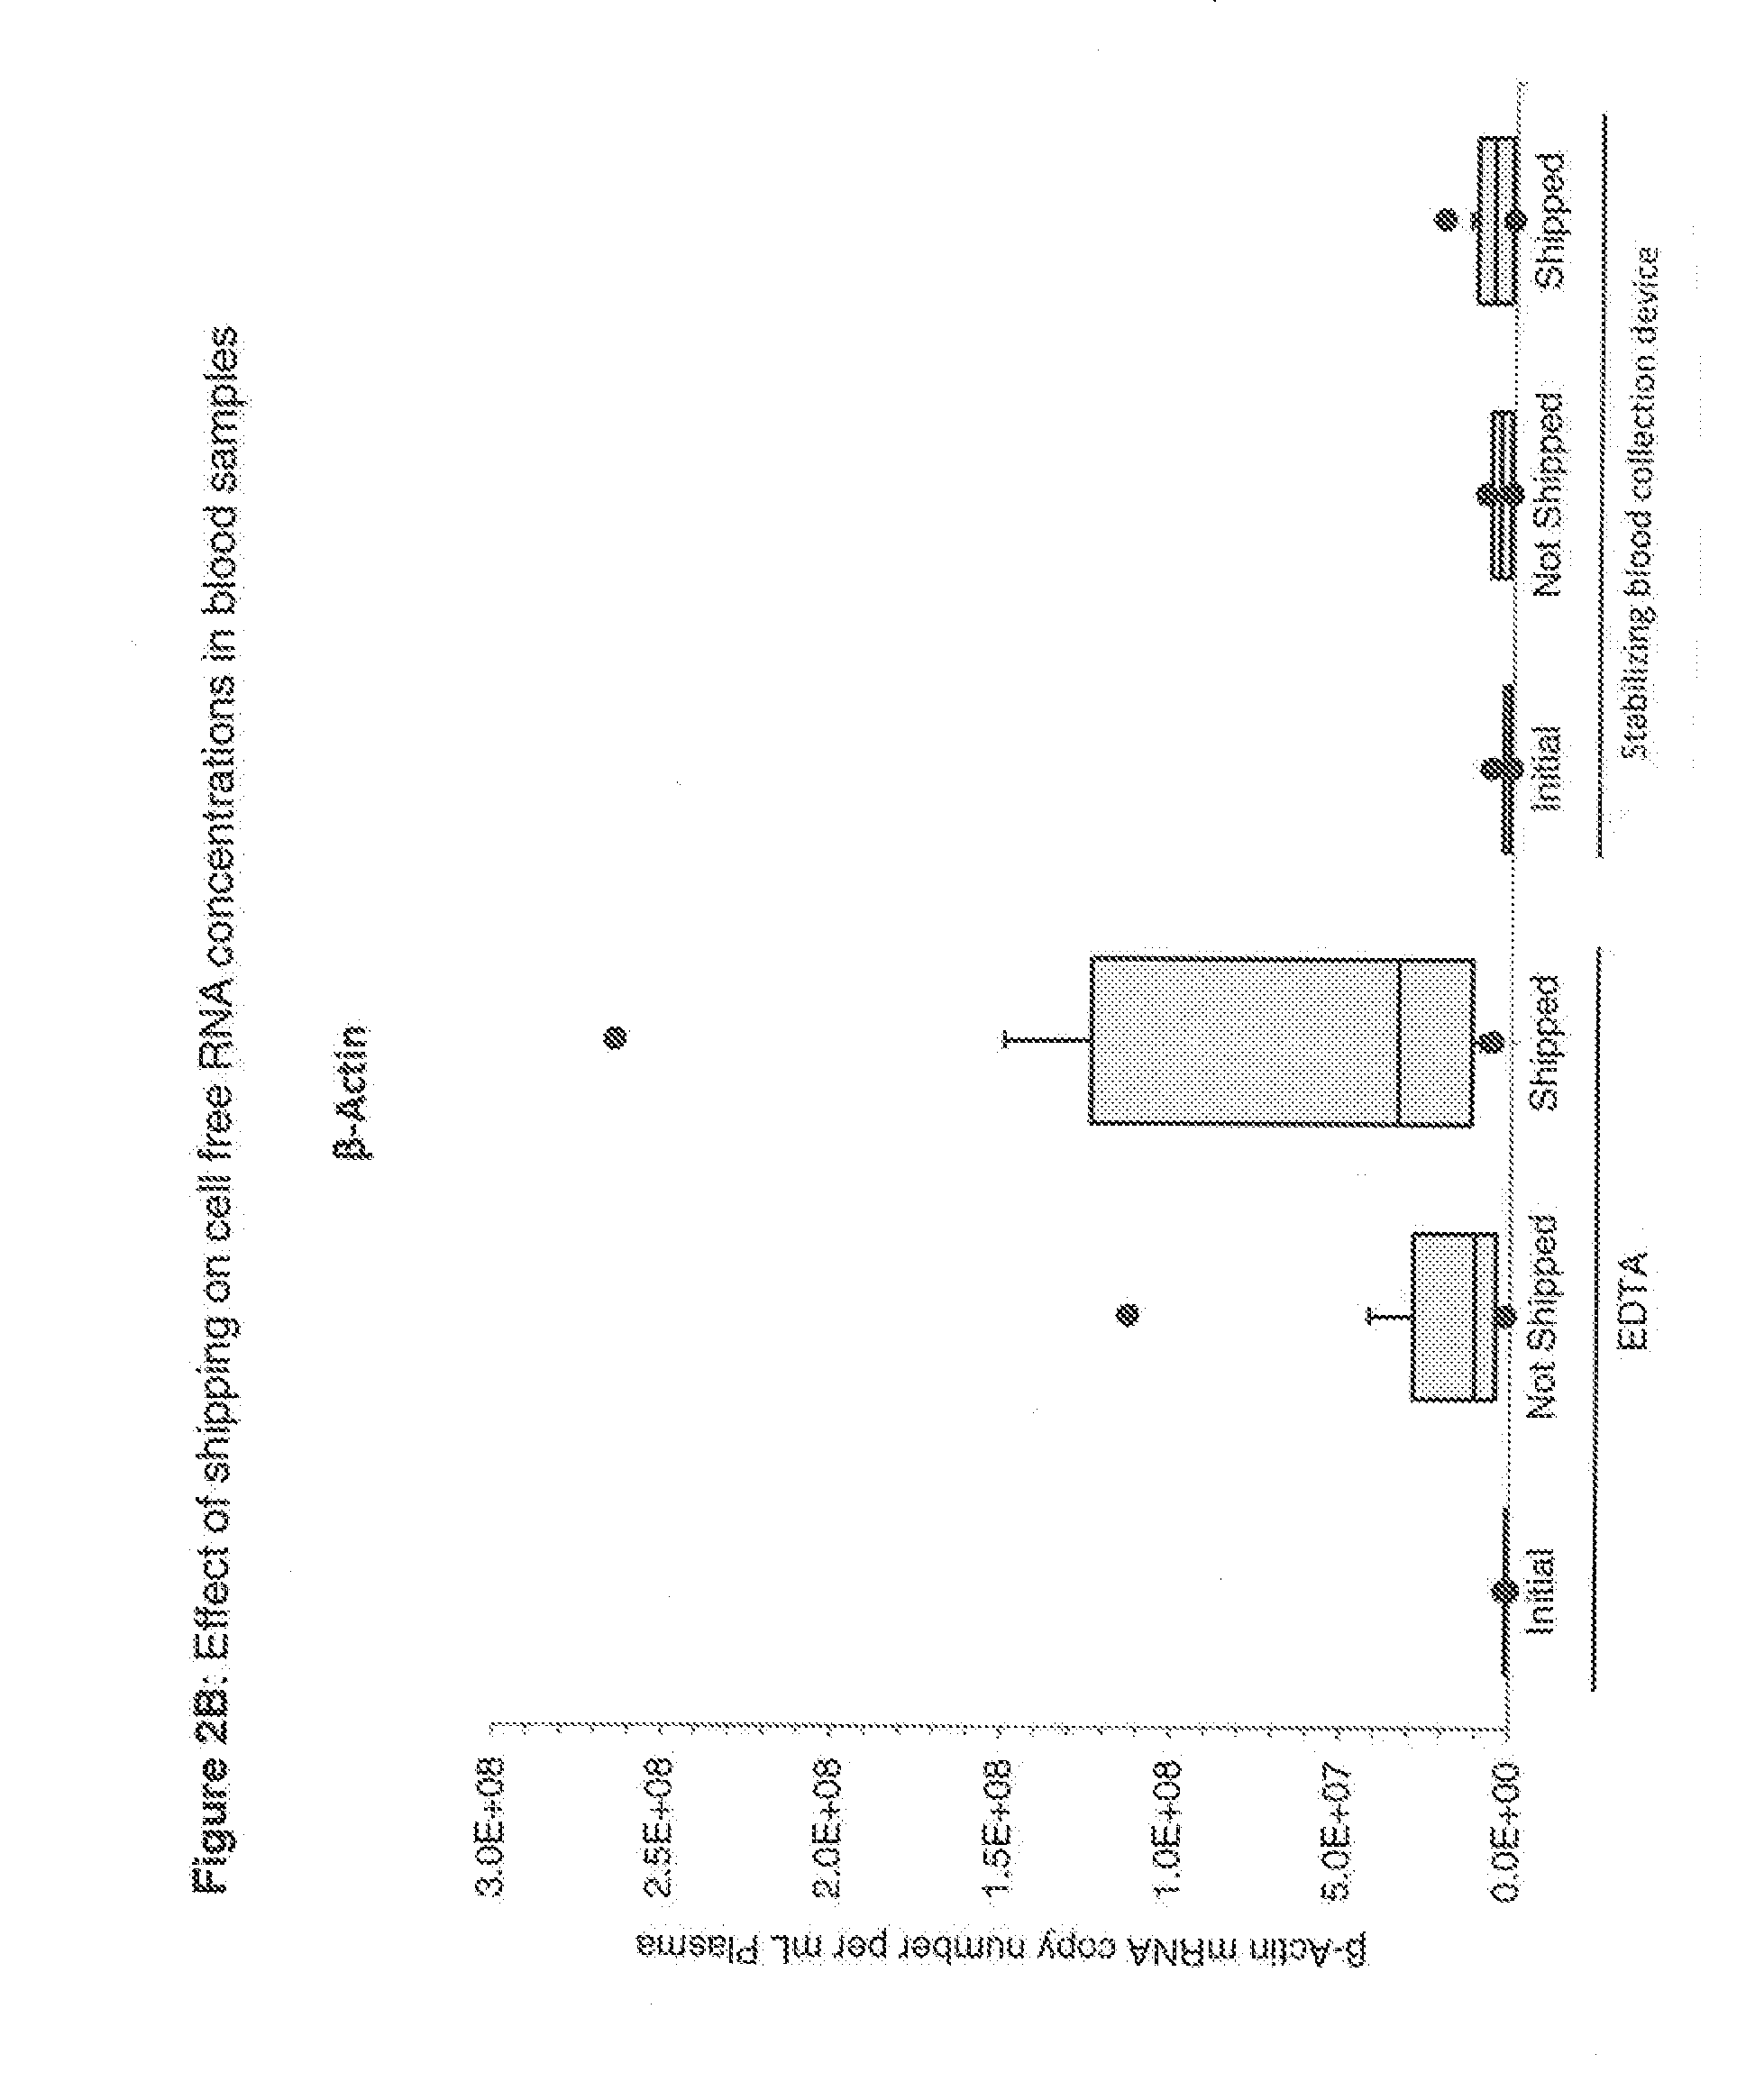 Blood collection device for stabilizing cell-free RNA in blood during sample shipping and storage